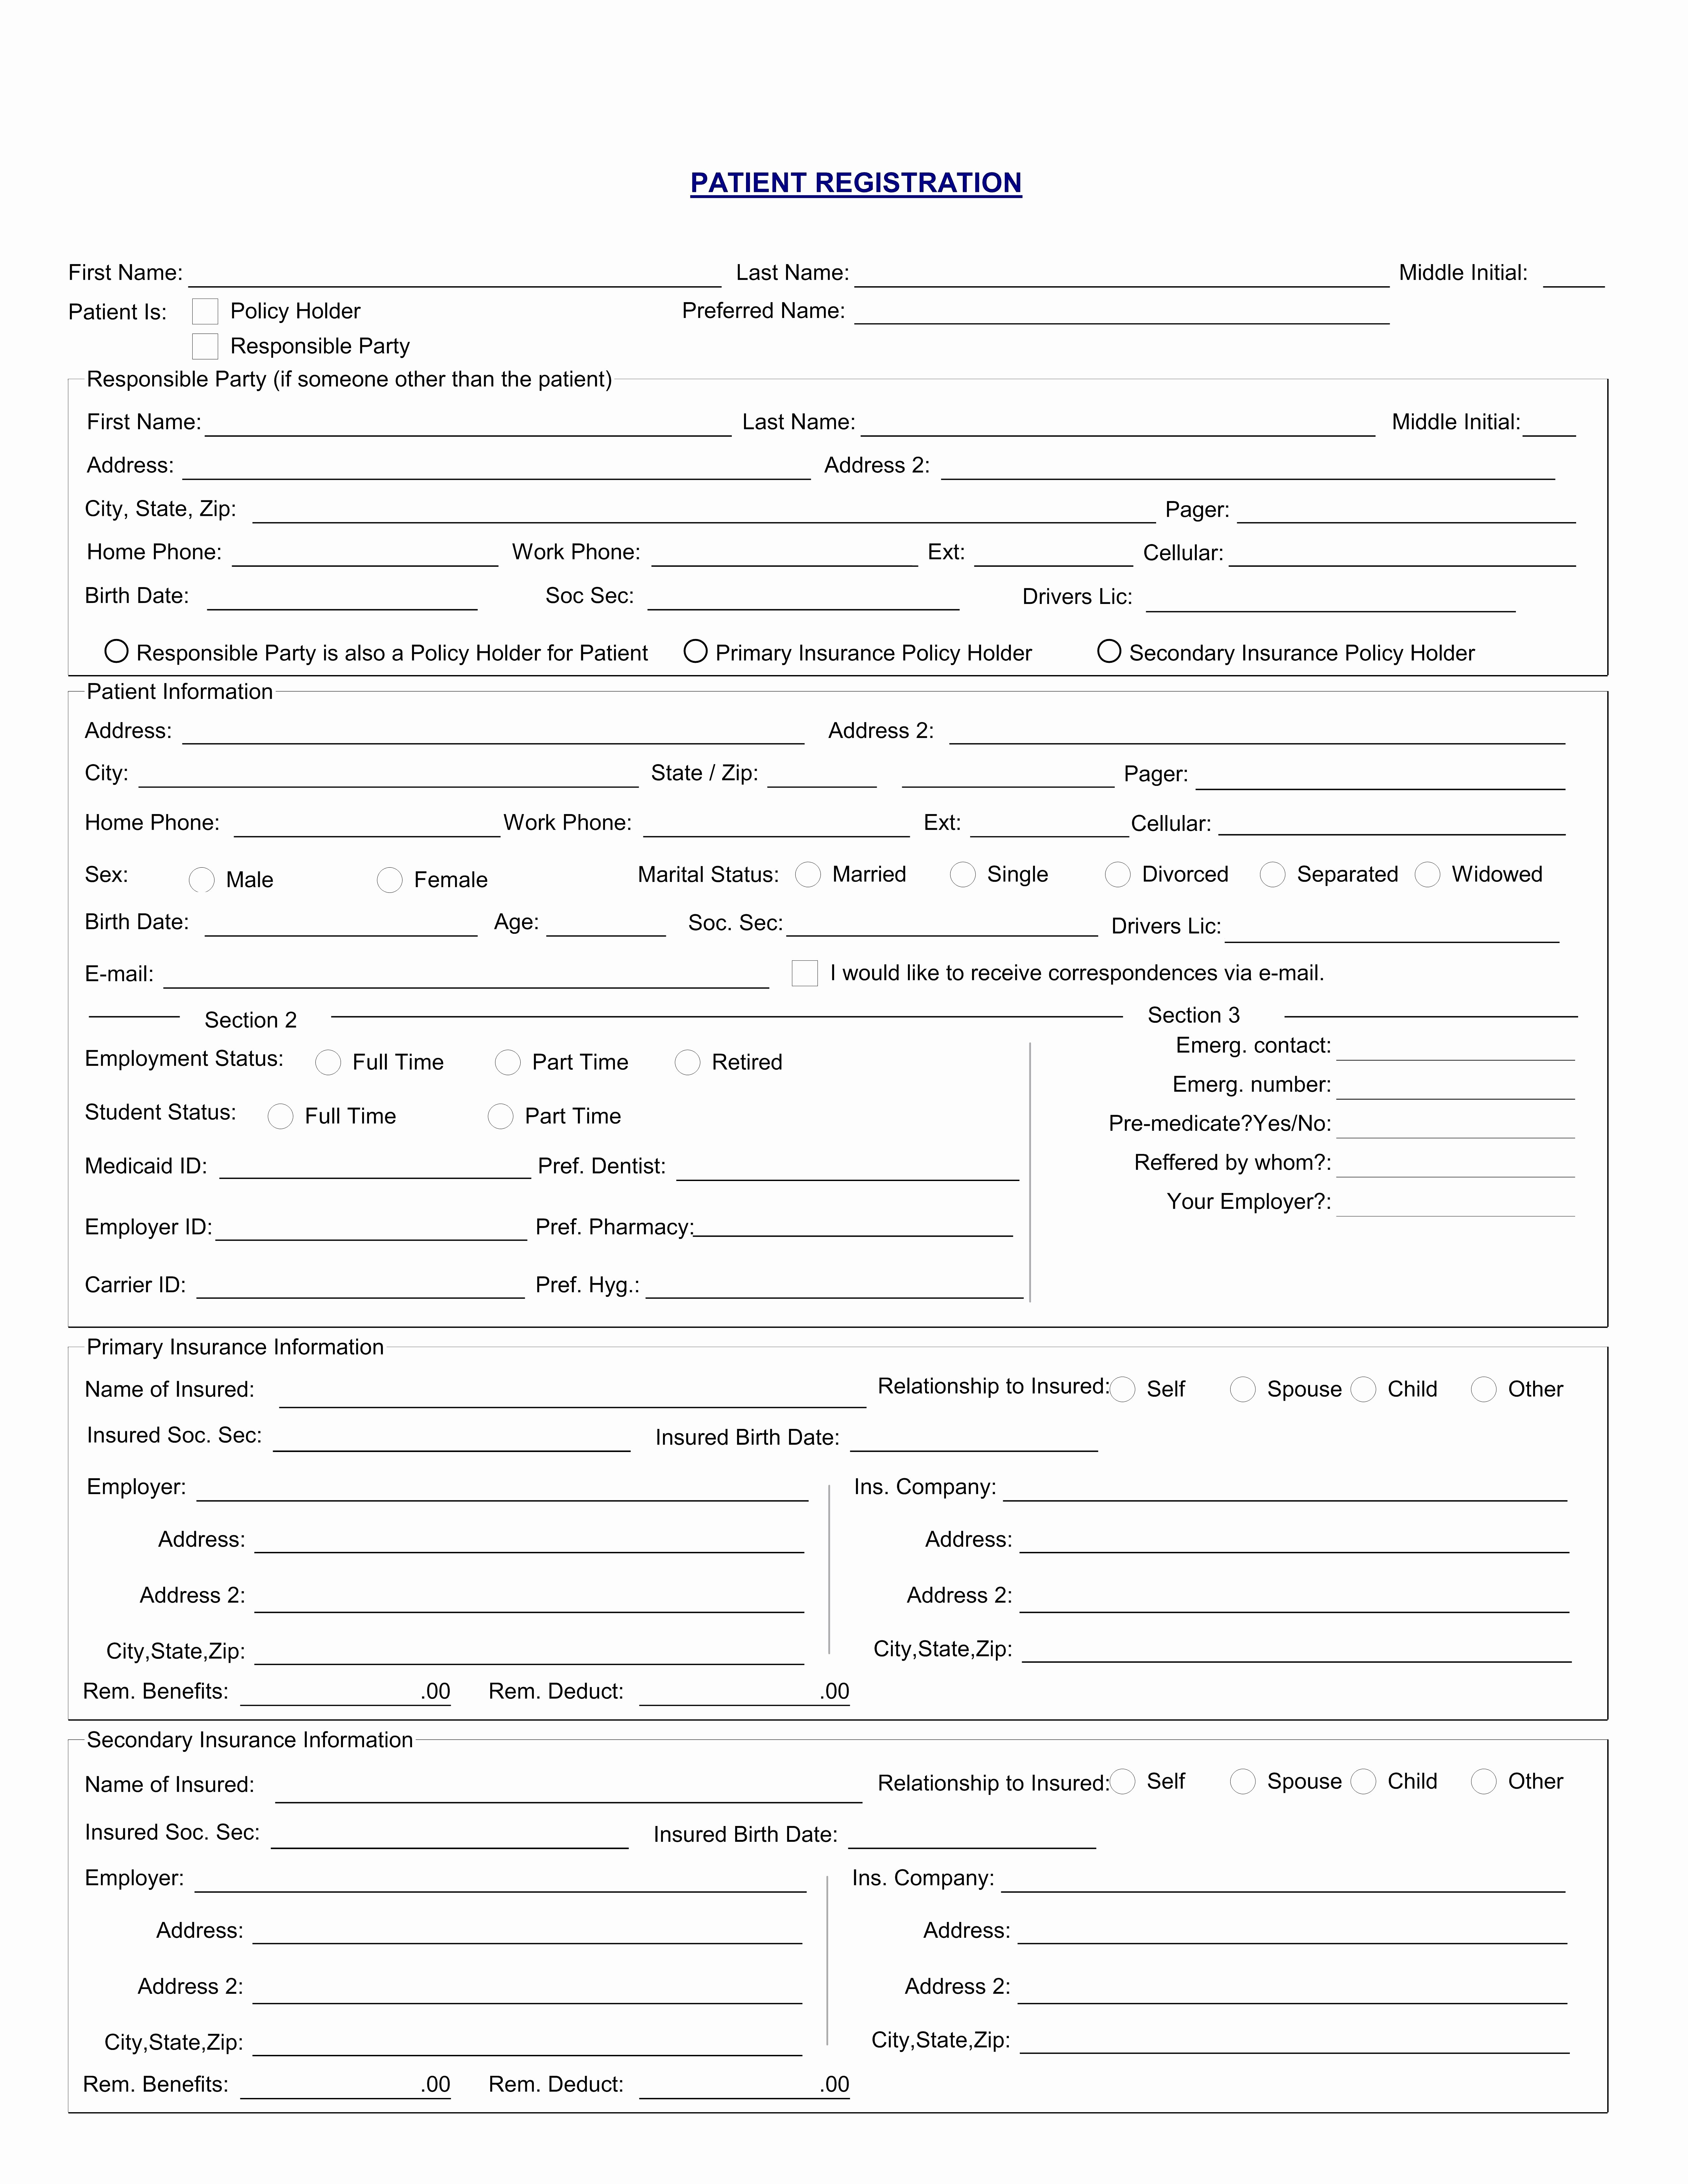 Camp Registration form Template Beautiful Awesome 2015 Carelot Summer Camp Registration form School